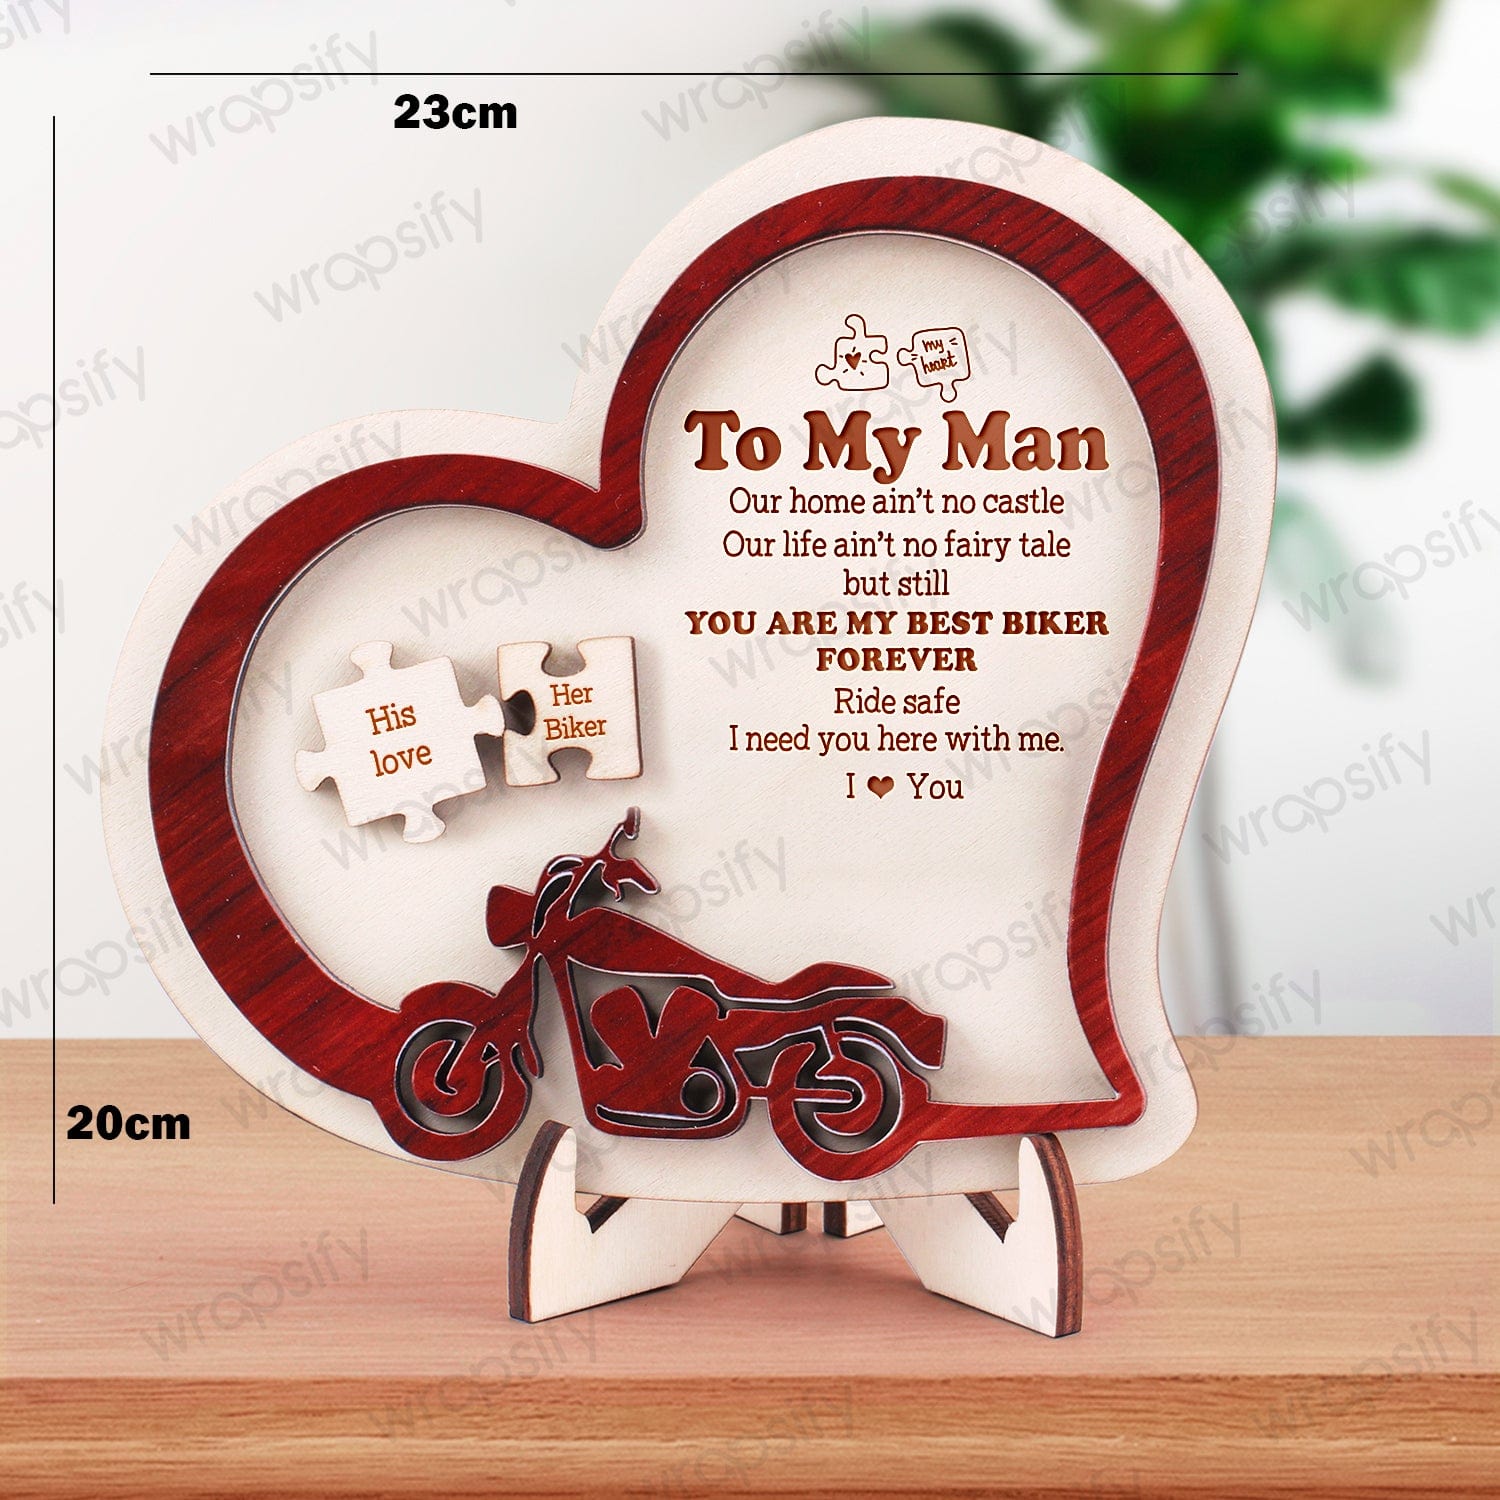 Wooden Motorcycle Heart Sign - Biker - To My Man - You Are My Best Biker Forever - Gan26005